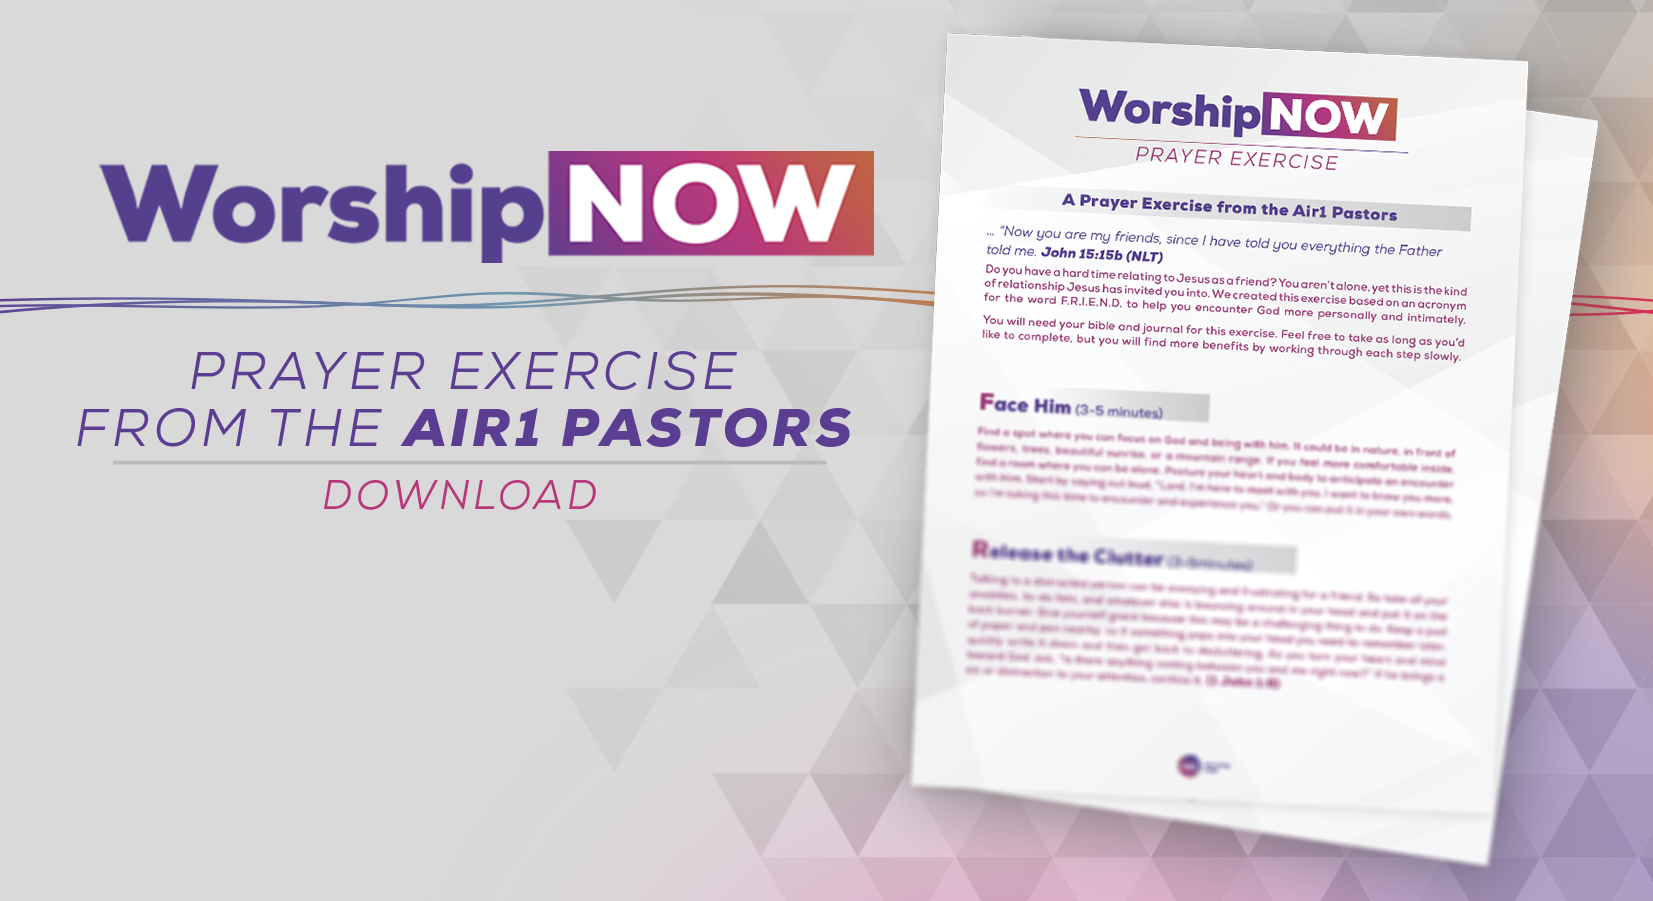 Worship Now Prayer Exercise with the Air1 Pastors